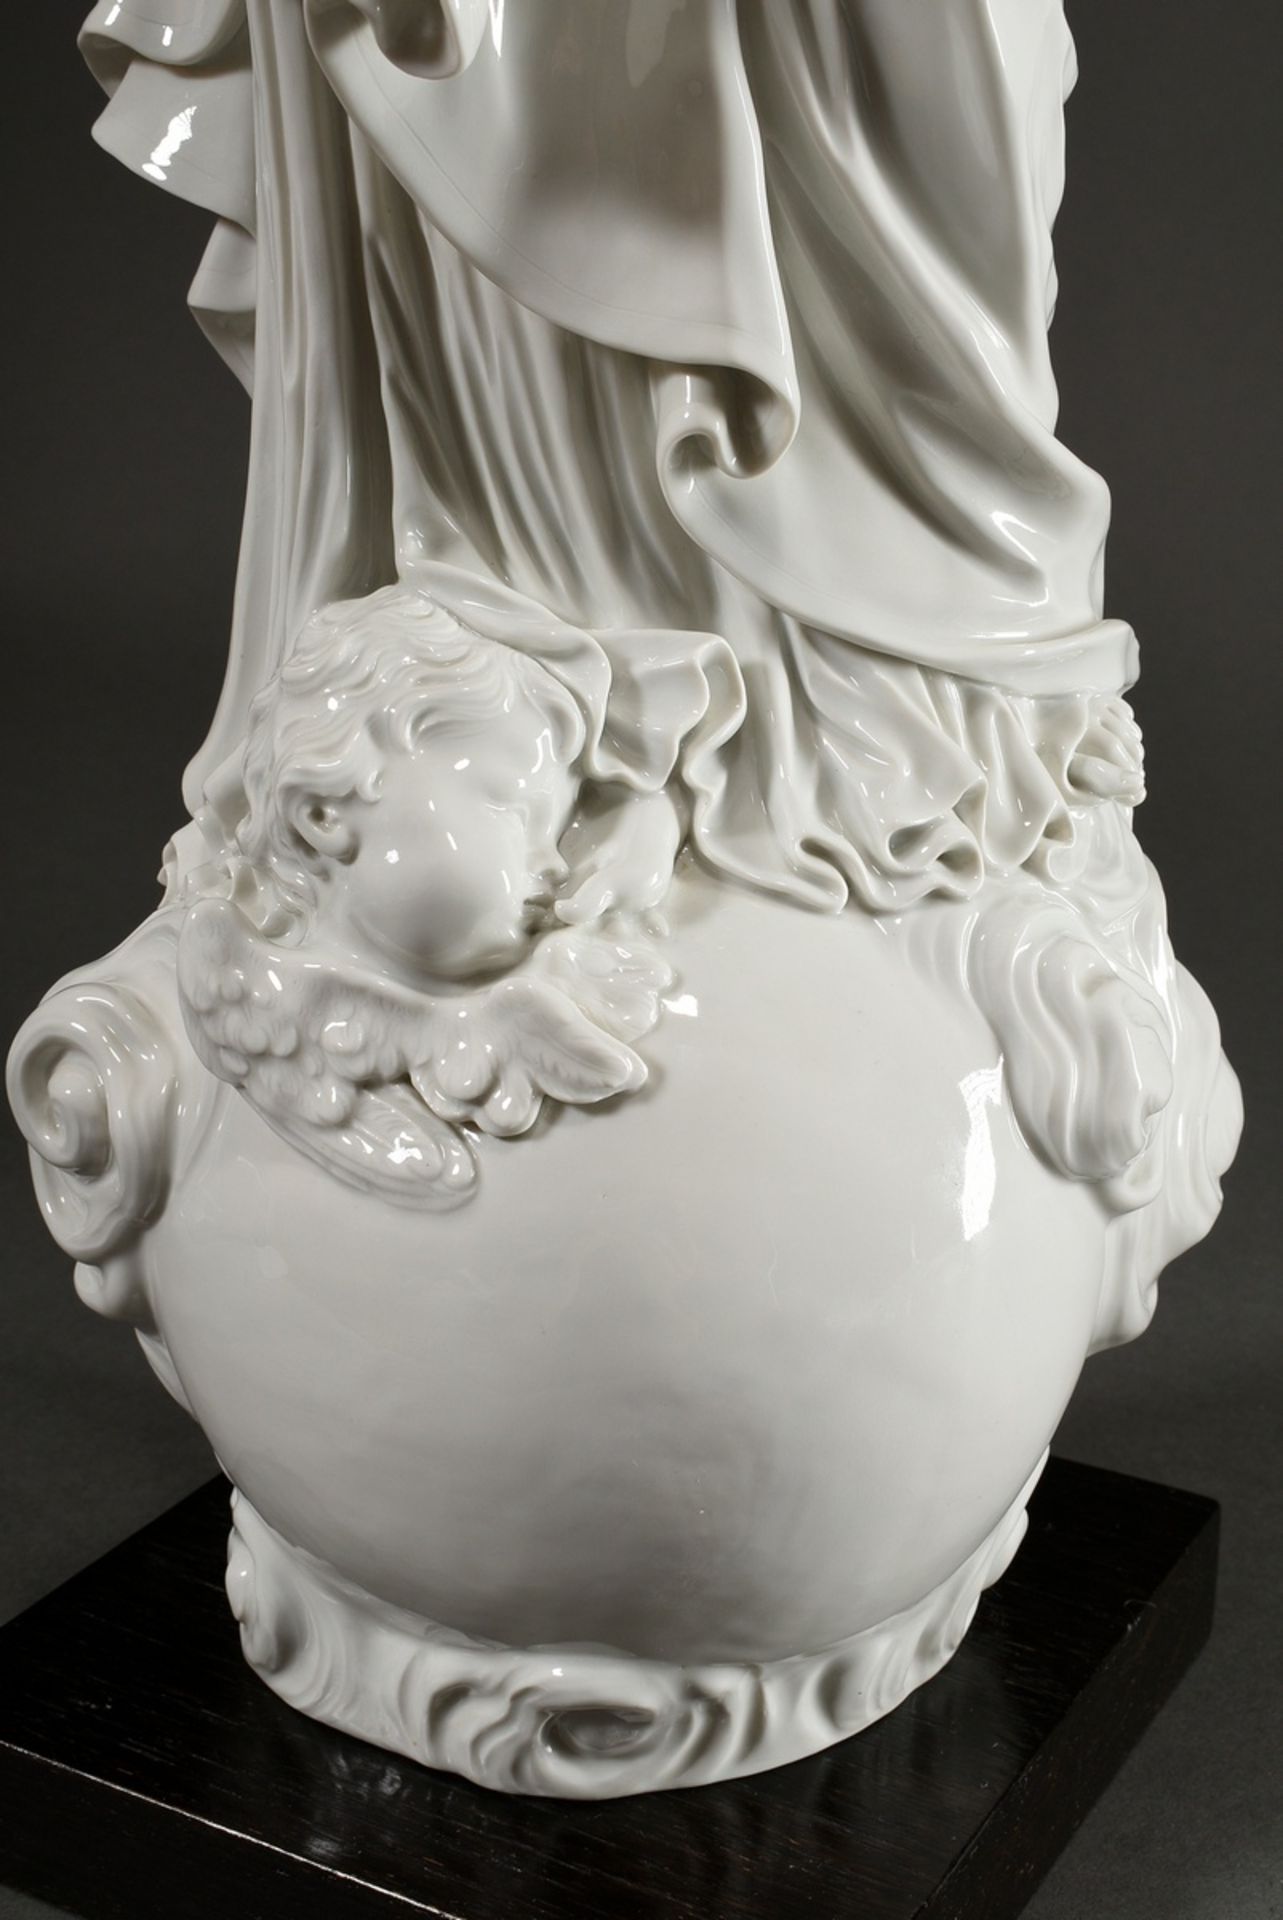 Large Meissen white porcelain figure "Madonna with the Child on the Globe", designed by Johann Gott - Image 5 of 11